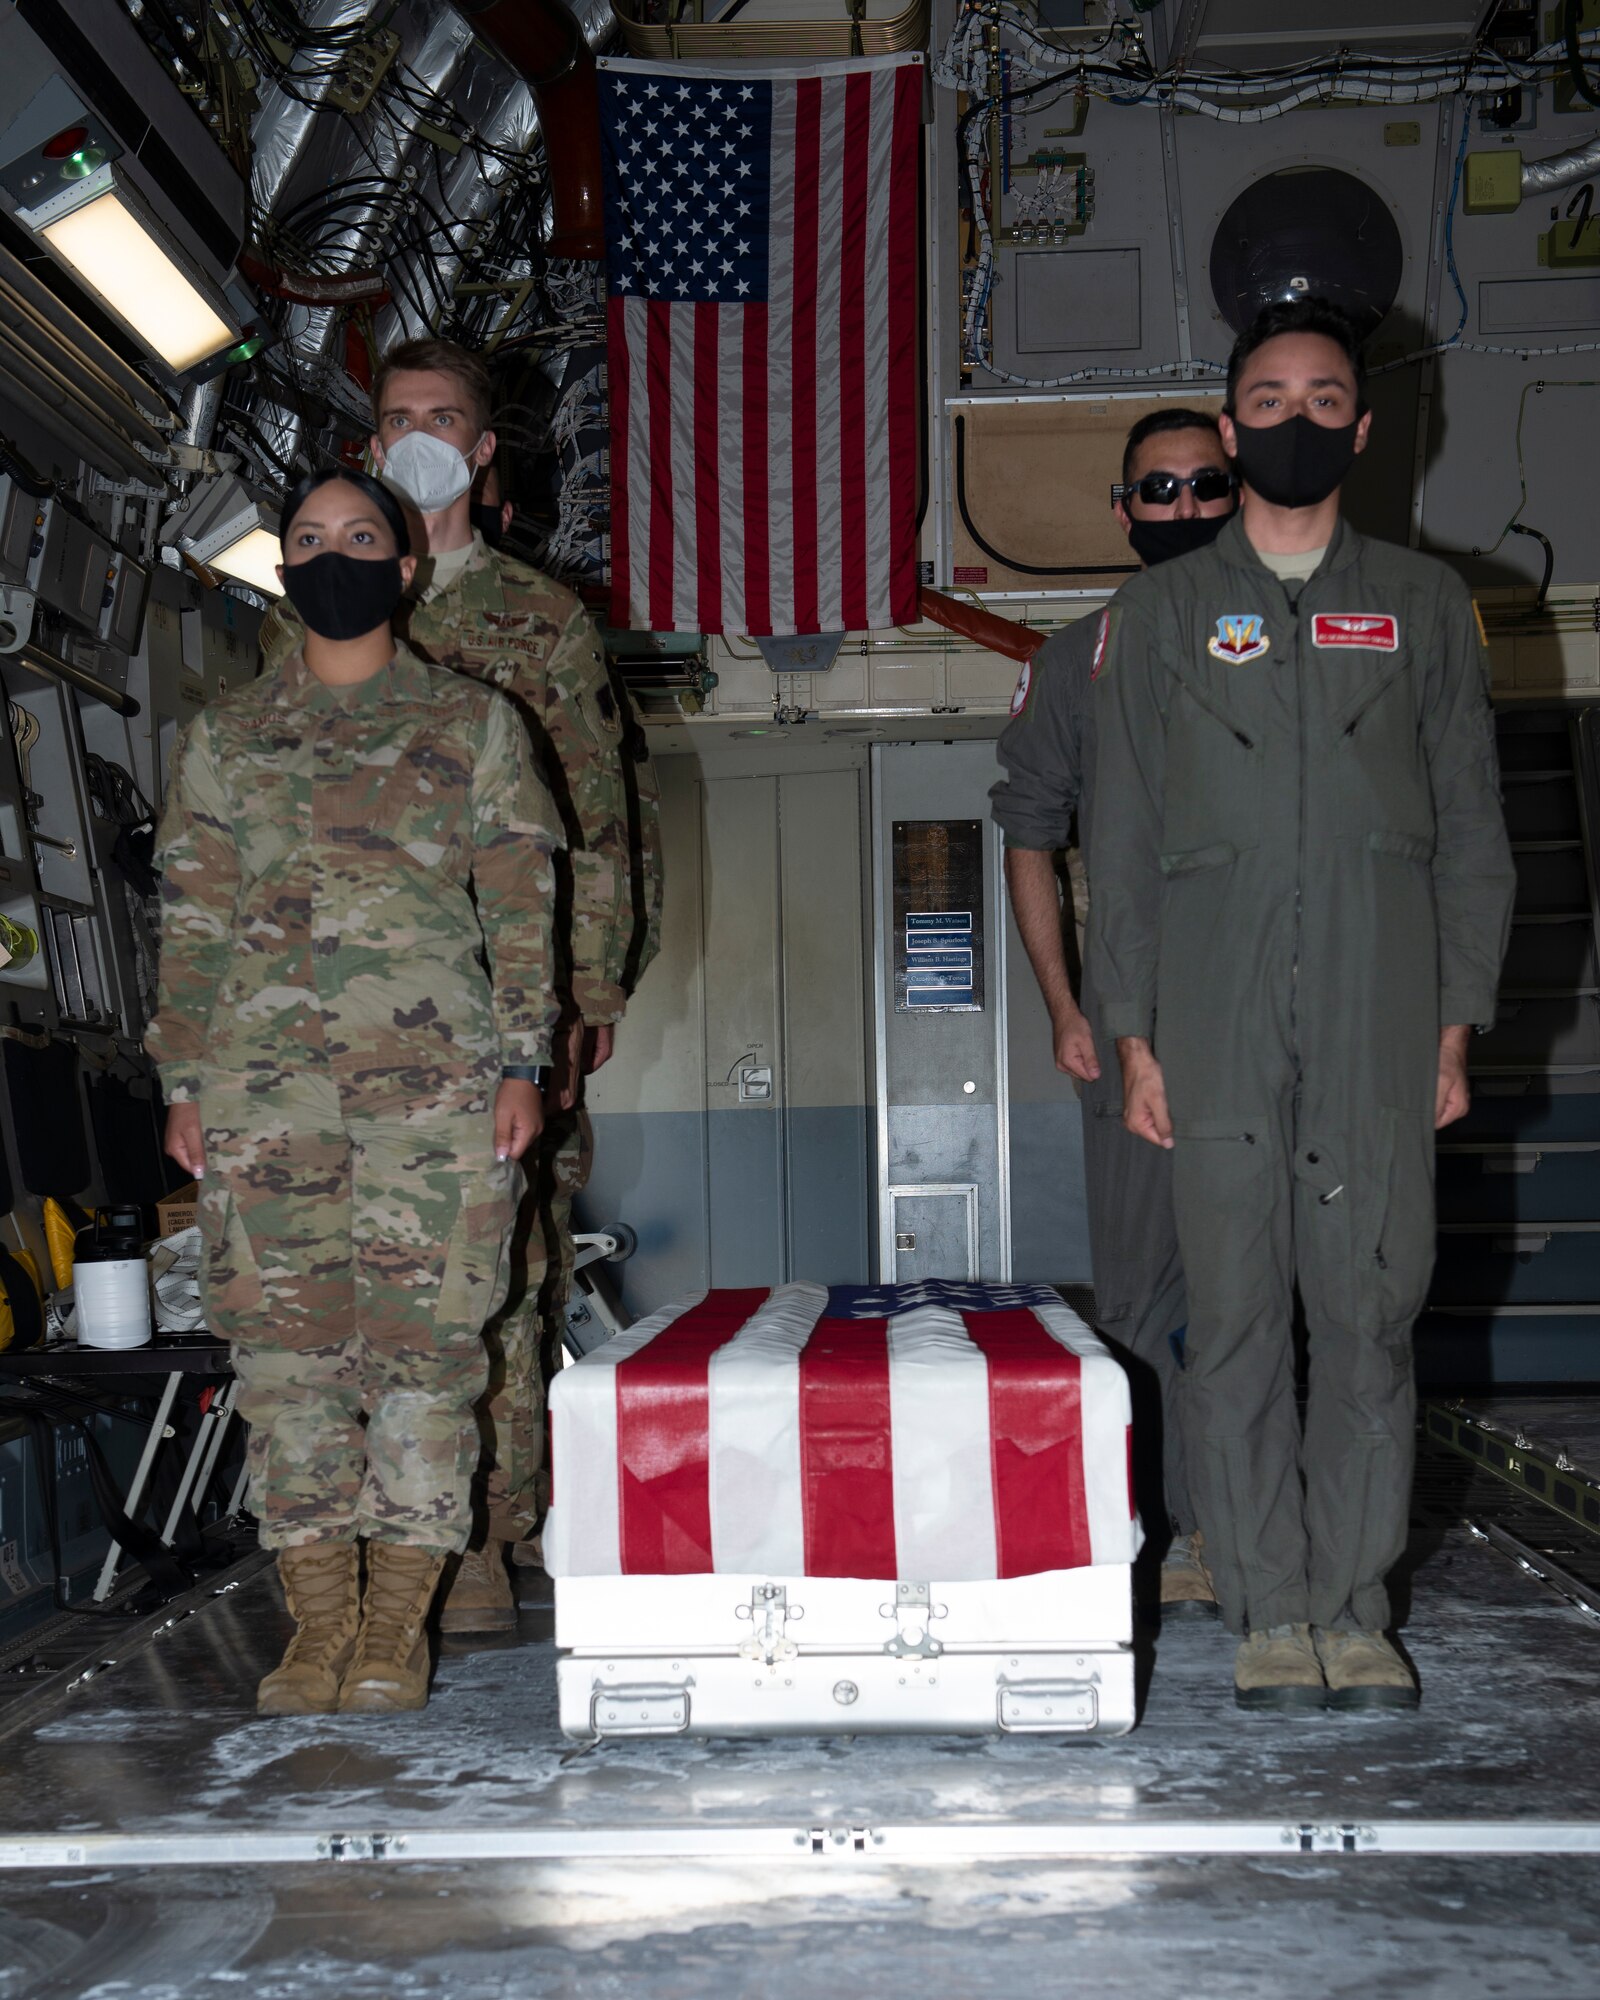 Airmen inside cargo area of airplane, standing at attention next to a U.S. flag draped transfer case